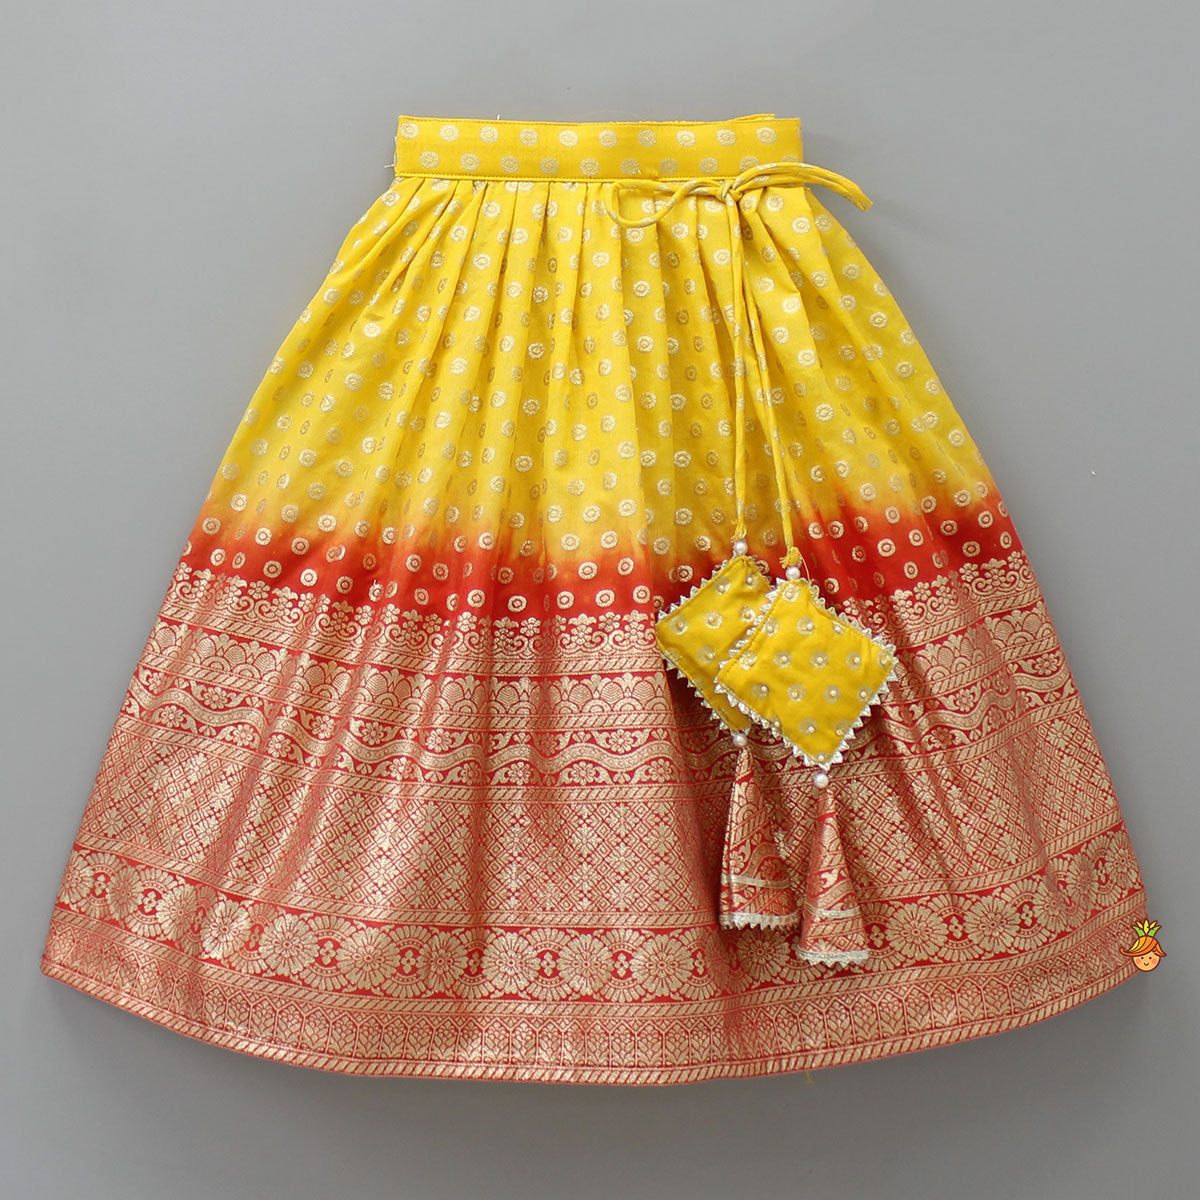 Splendid Embroidered Yellow Top With Lehenga And Fringed Lace Dupatta